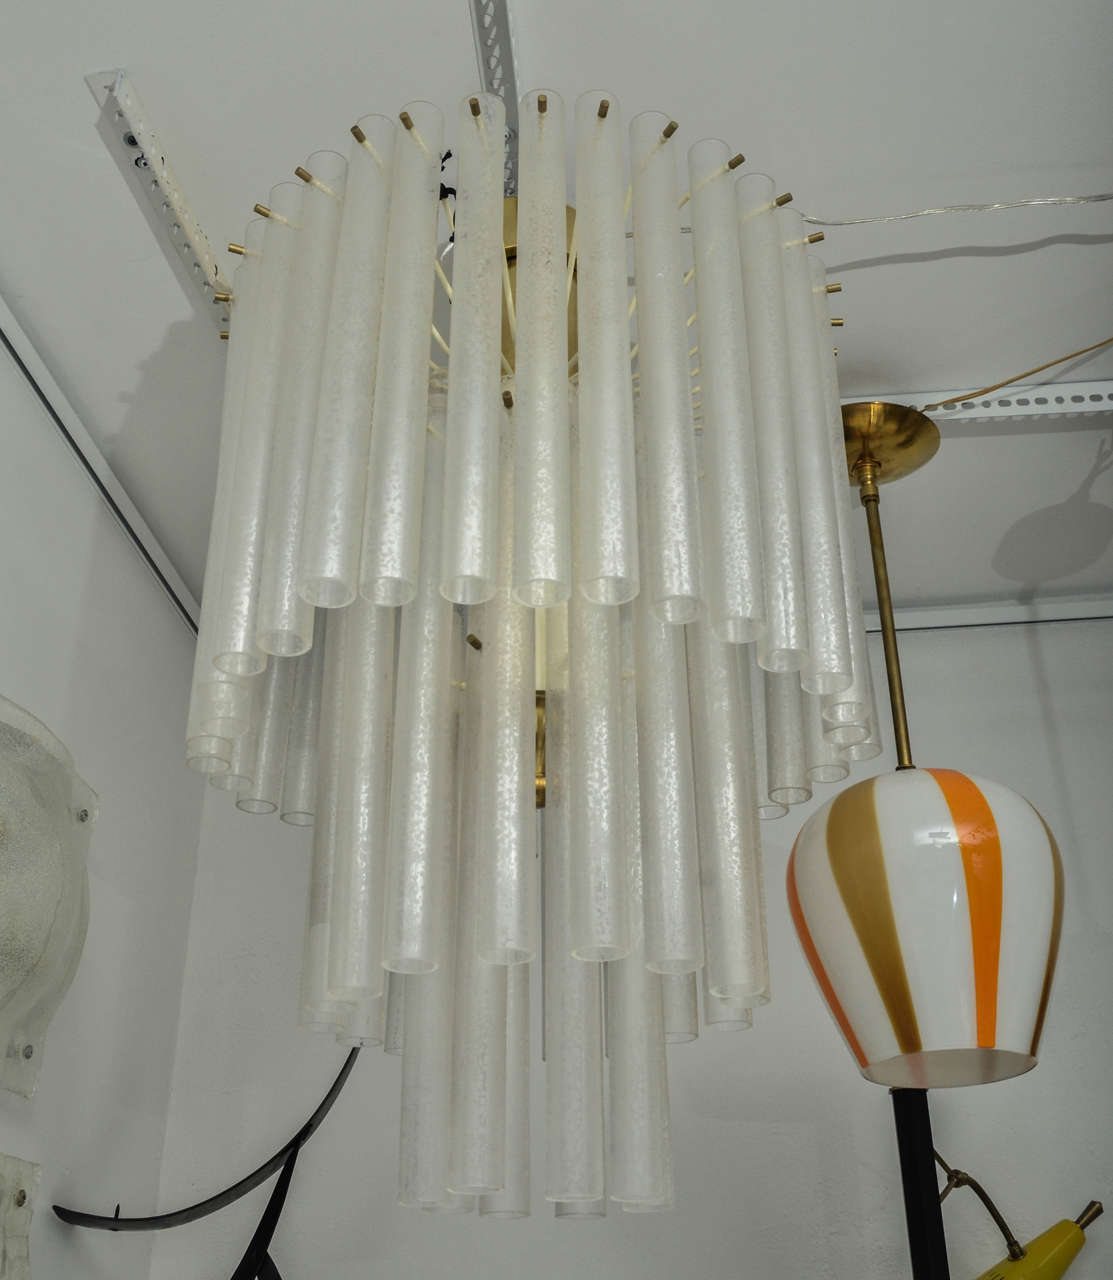 Mid-Century Modern Three-Tier Chandelier Composed of Multiple Frosted Glass Tubes by Venini